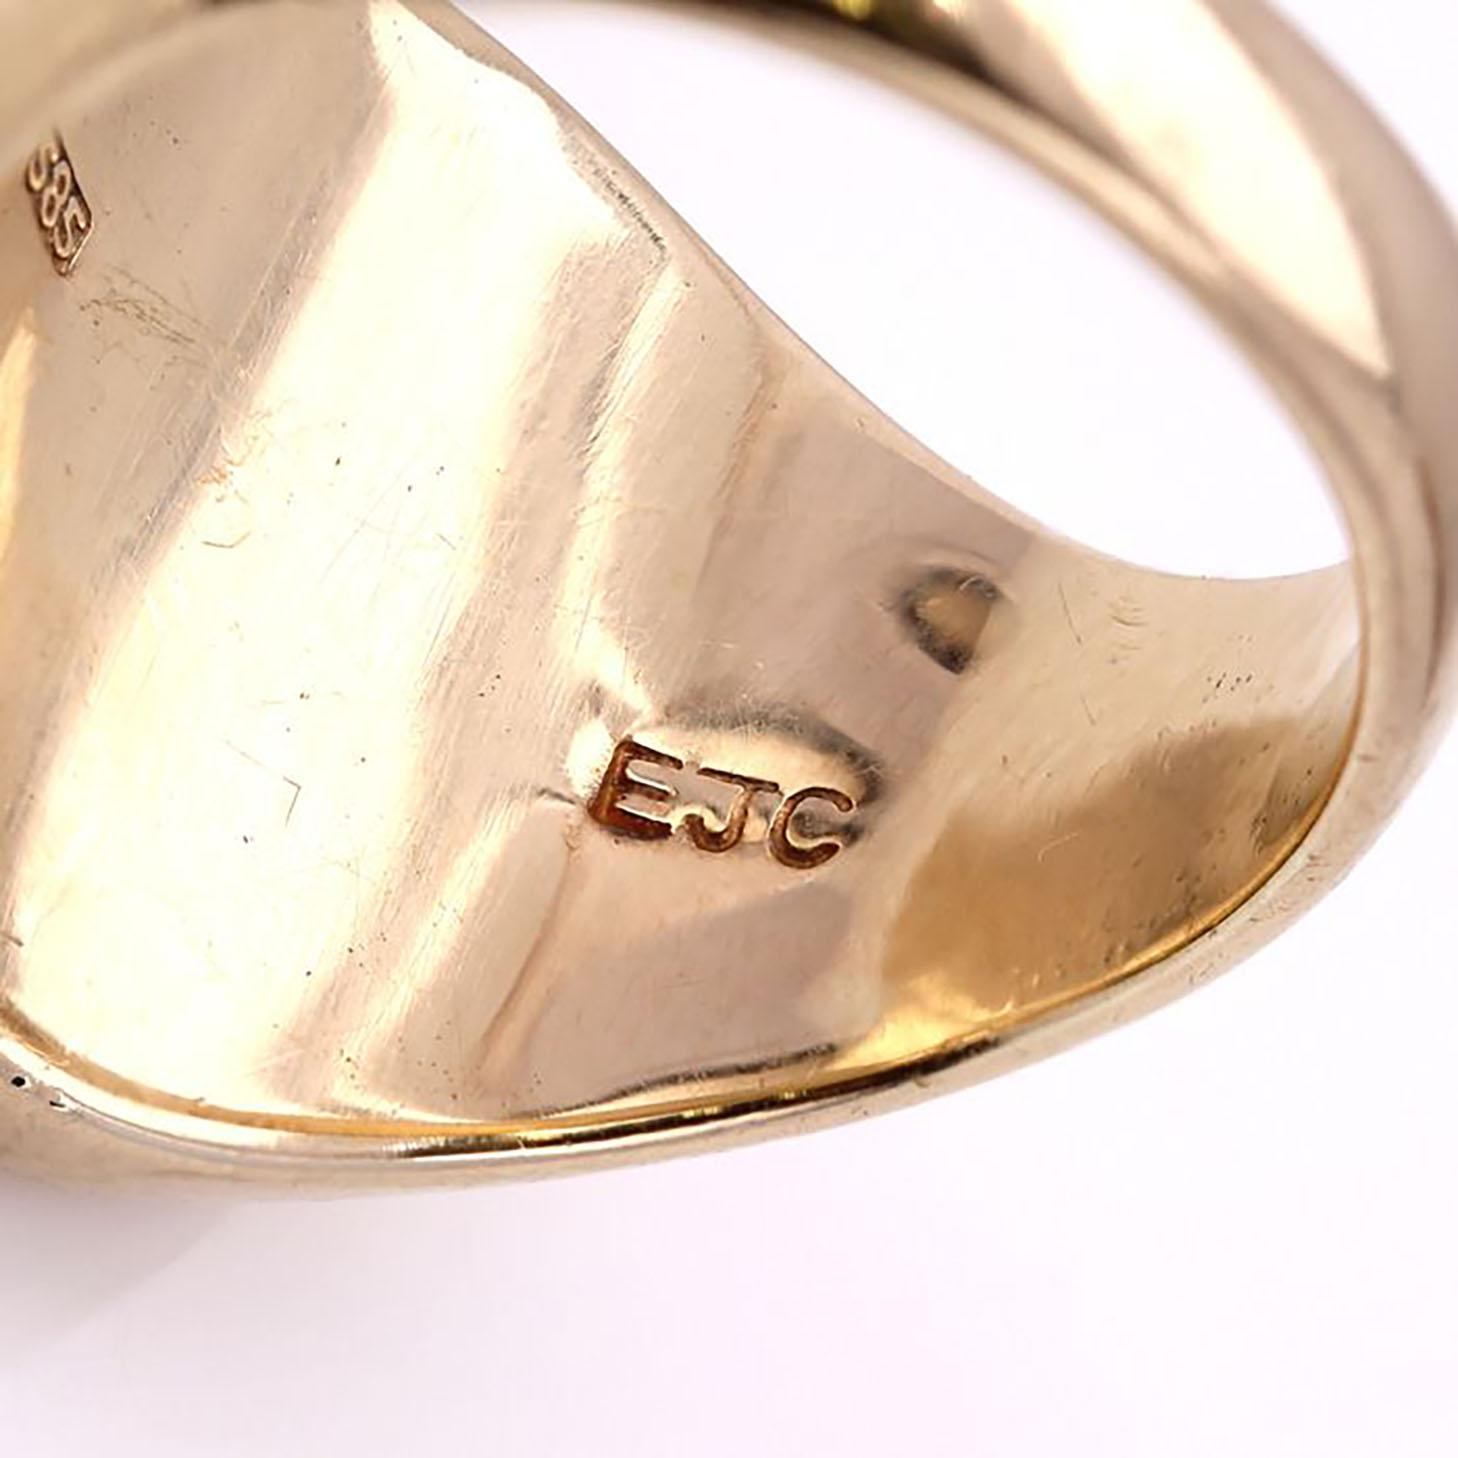 Women's or Men's Vintage 14kt. Yellow Gold Oval Signet Ring with Engraved Dog and Latin Phrase